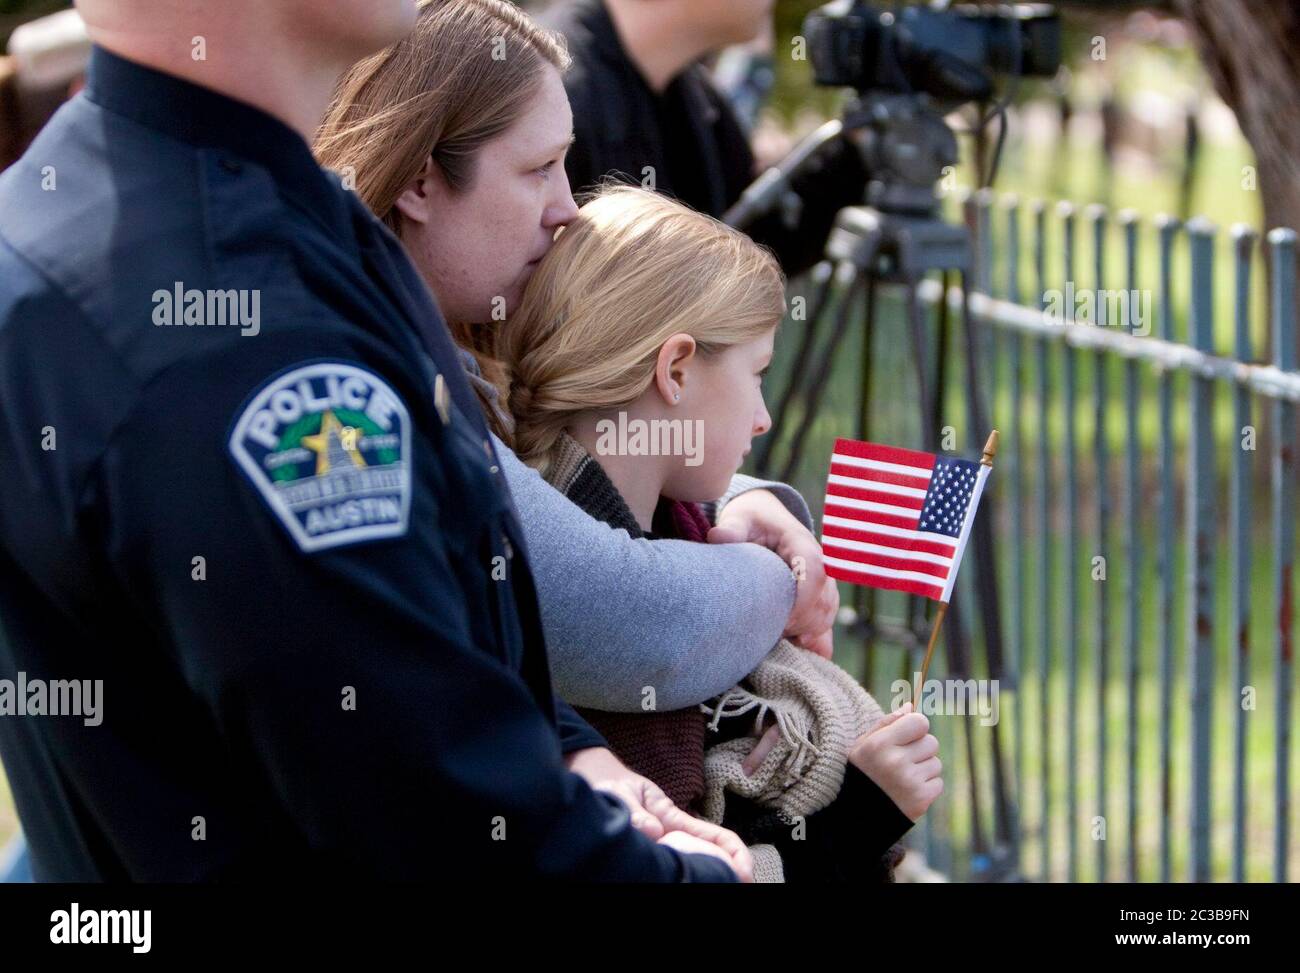 Austin Texas USA, February 12, 2013: A woman hugs her daughter, holding a small American flag, as they pay respects to former Navy SEAL Chris Kyle during his burial at the Texas State Cemetery. Kyle served four tours of duty as a sniper during the Iraq war, and wrote a popular book about his experiences there. He was fatally shot by a fellow Iraq war veteran at a gun range in Glen Rose, Texas on February 2. ©Marjorie Kamys Cotera/Daemmrich Photography Stock Photo